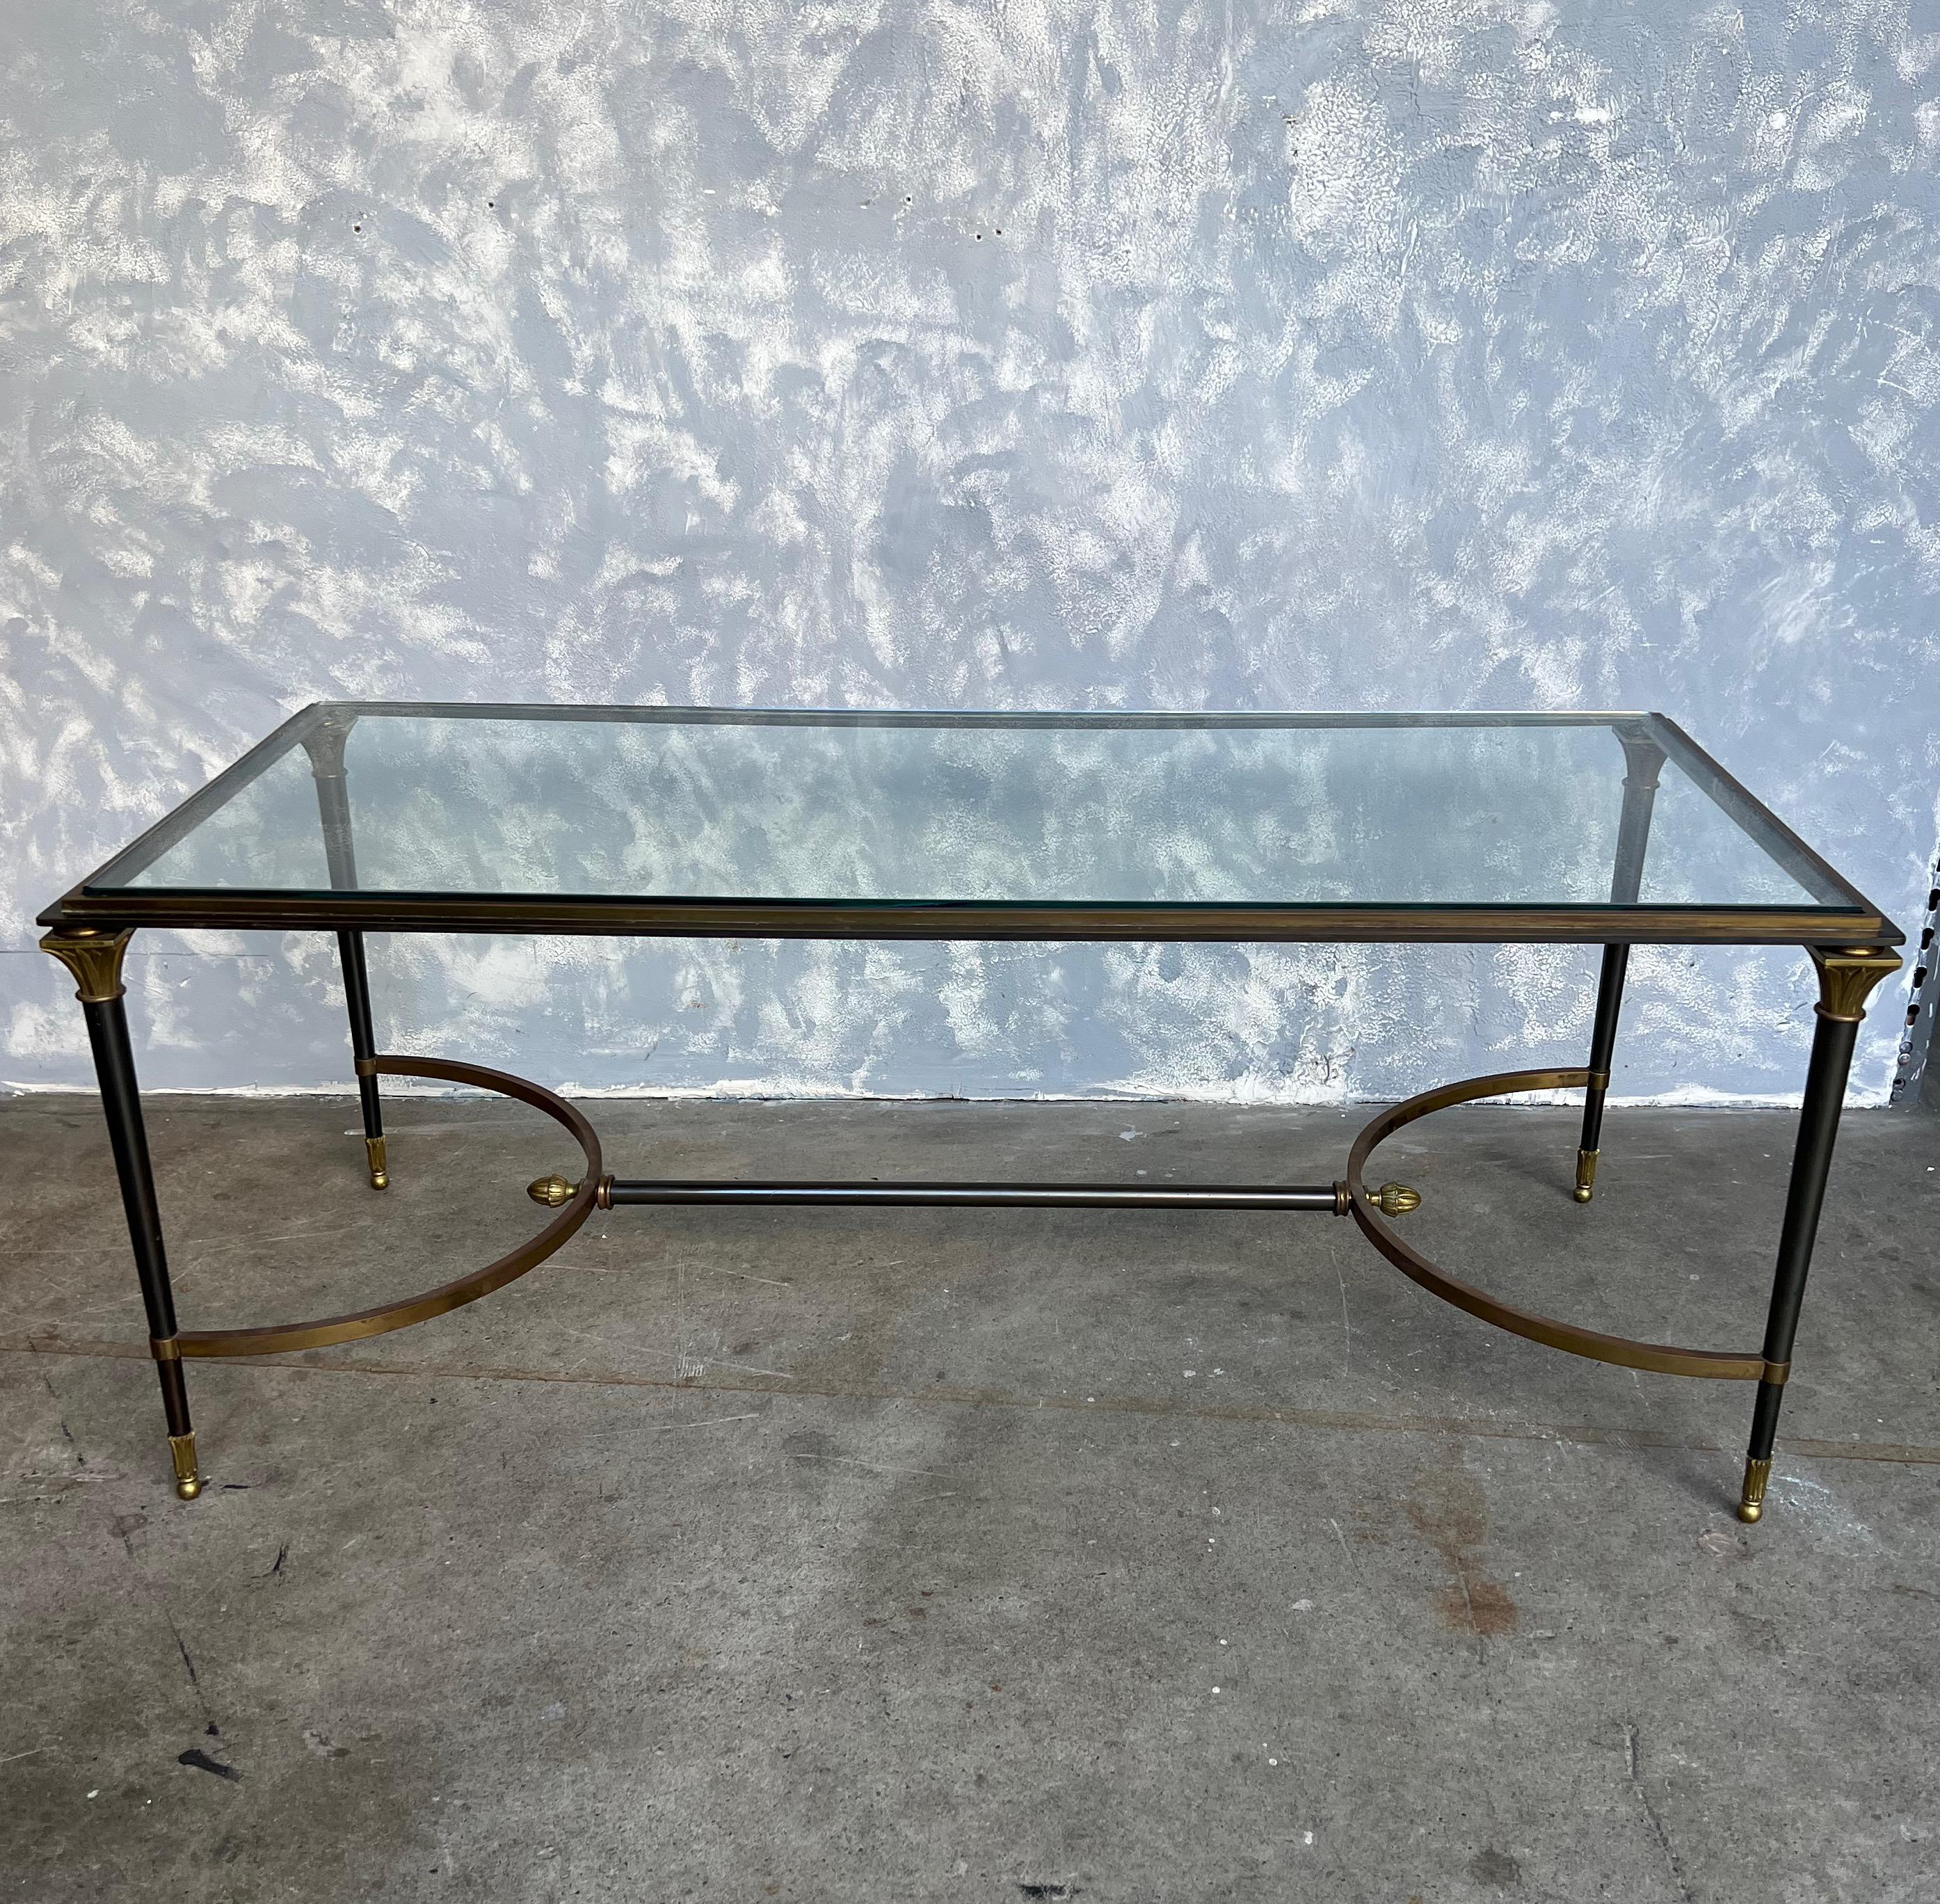 An elegant Italian 1960s Neoclassical style coffee table in the style of Jansen. The table is made of steel with classical gilt bronze decorative elements. The glass table top fits perfectly and the table is secured by a steel stretcher bar with